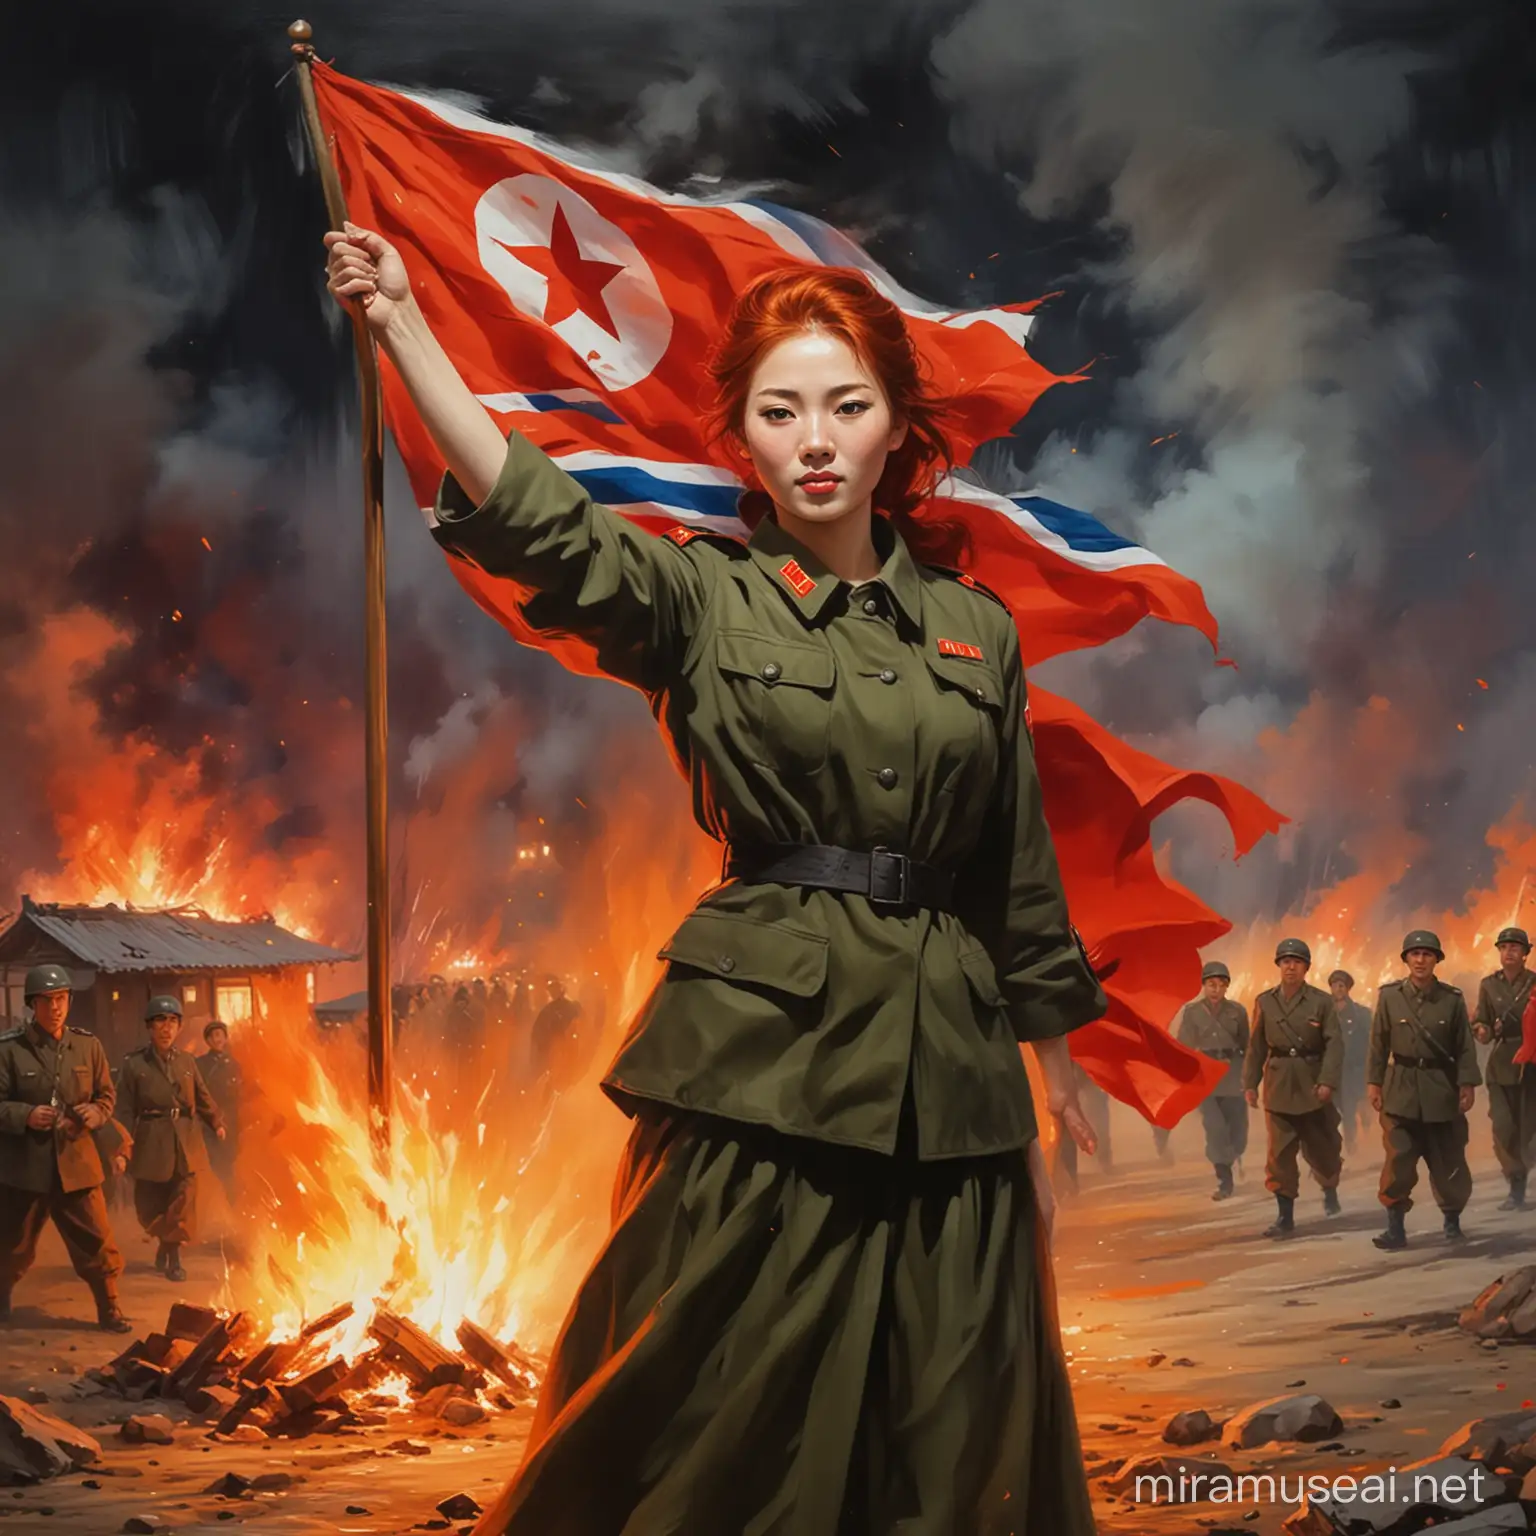 Impressionist Painting of RedHaired Woman in North Korean Soldier Attire Waving Red Flag with Village Ablaze at Night